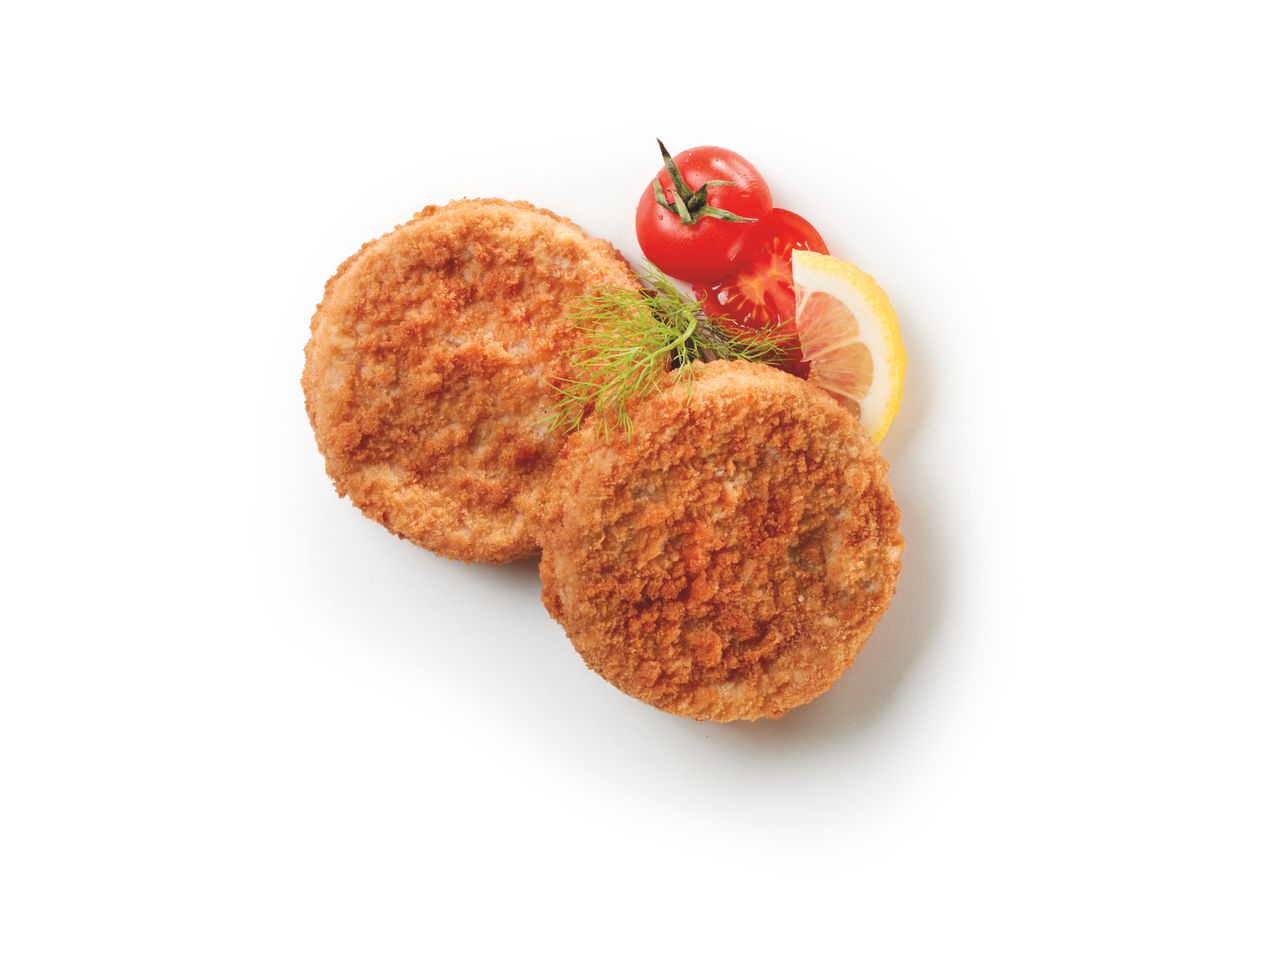 Go to full screen view: ASC Salmon Burger with Breadcrumbs - Image 1